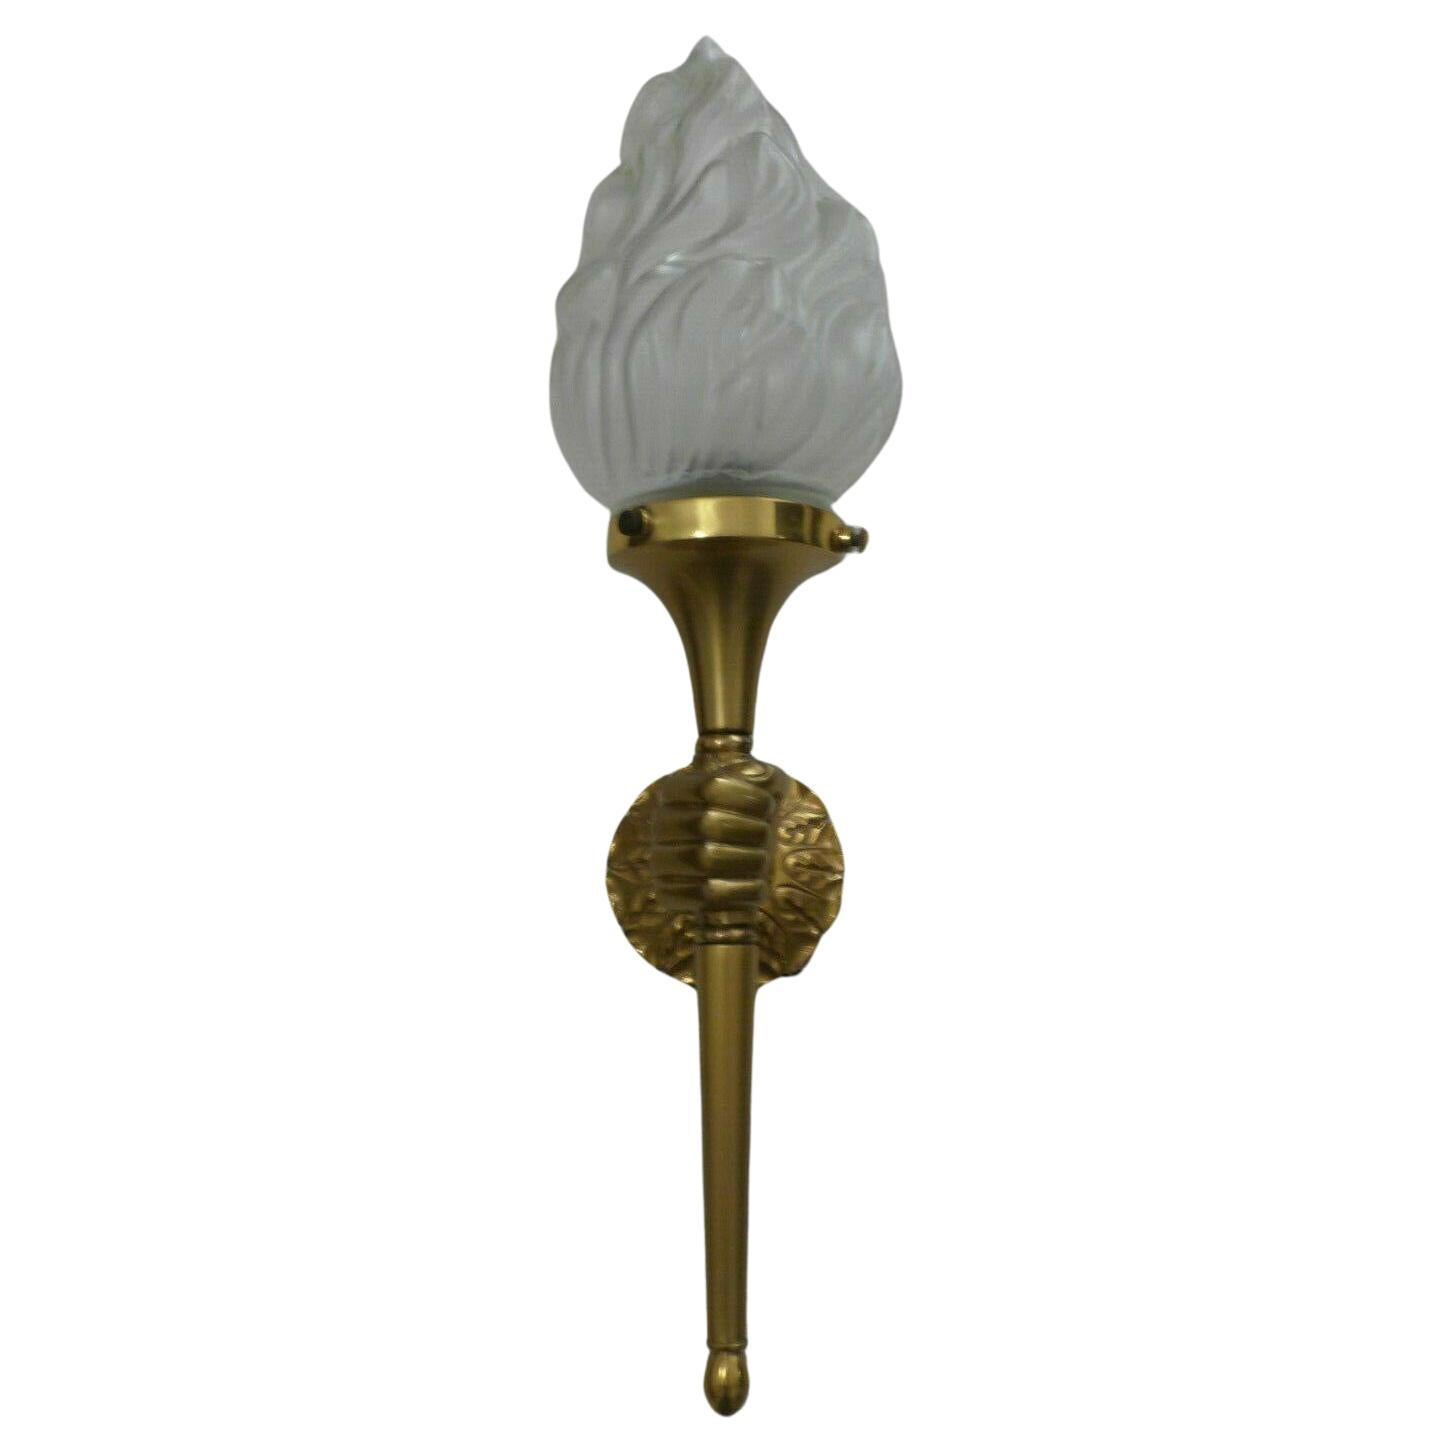 1930's French Art Deco Gilt Bronze Hand / Fist Holding Torch Wall Sconce  For Sale